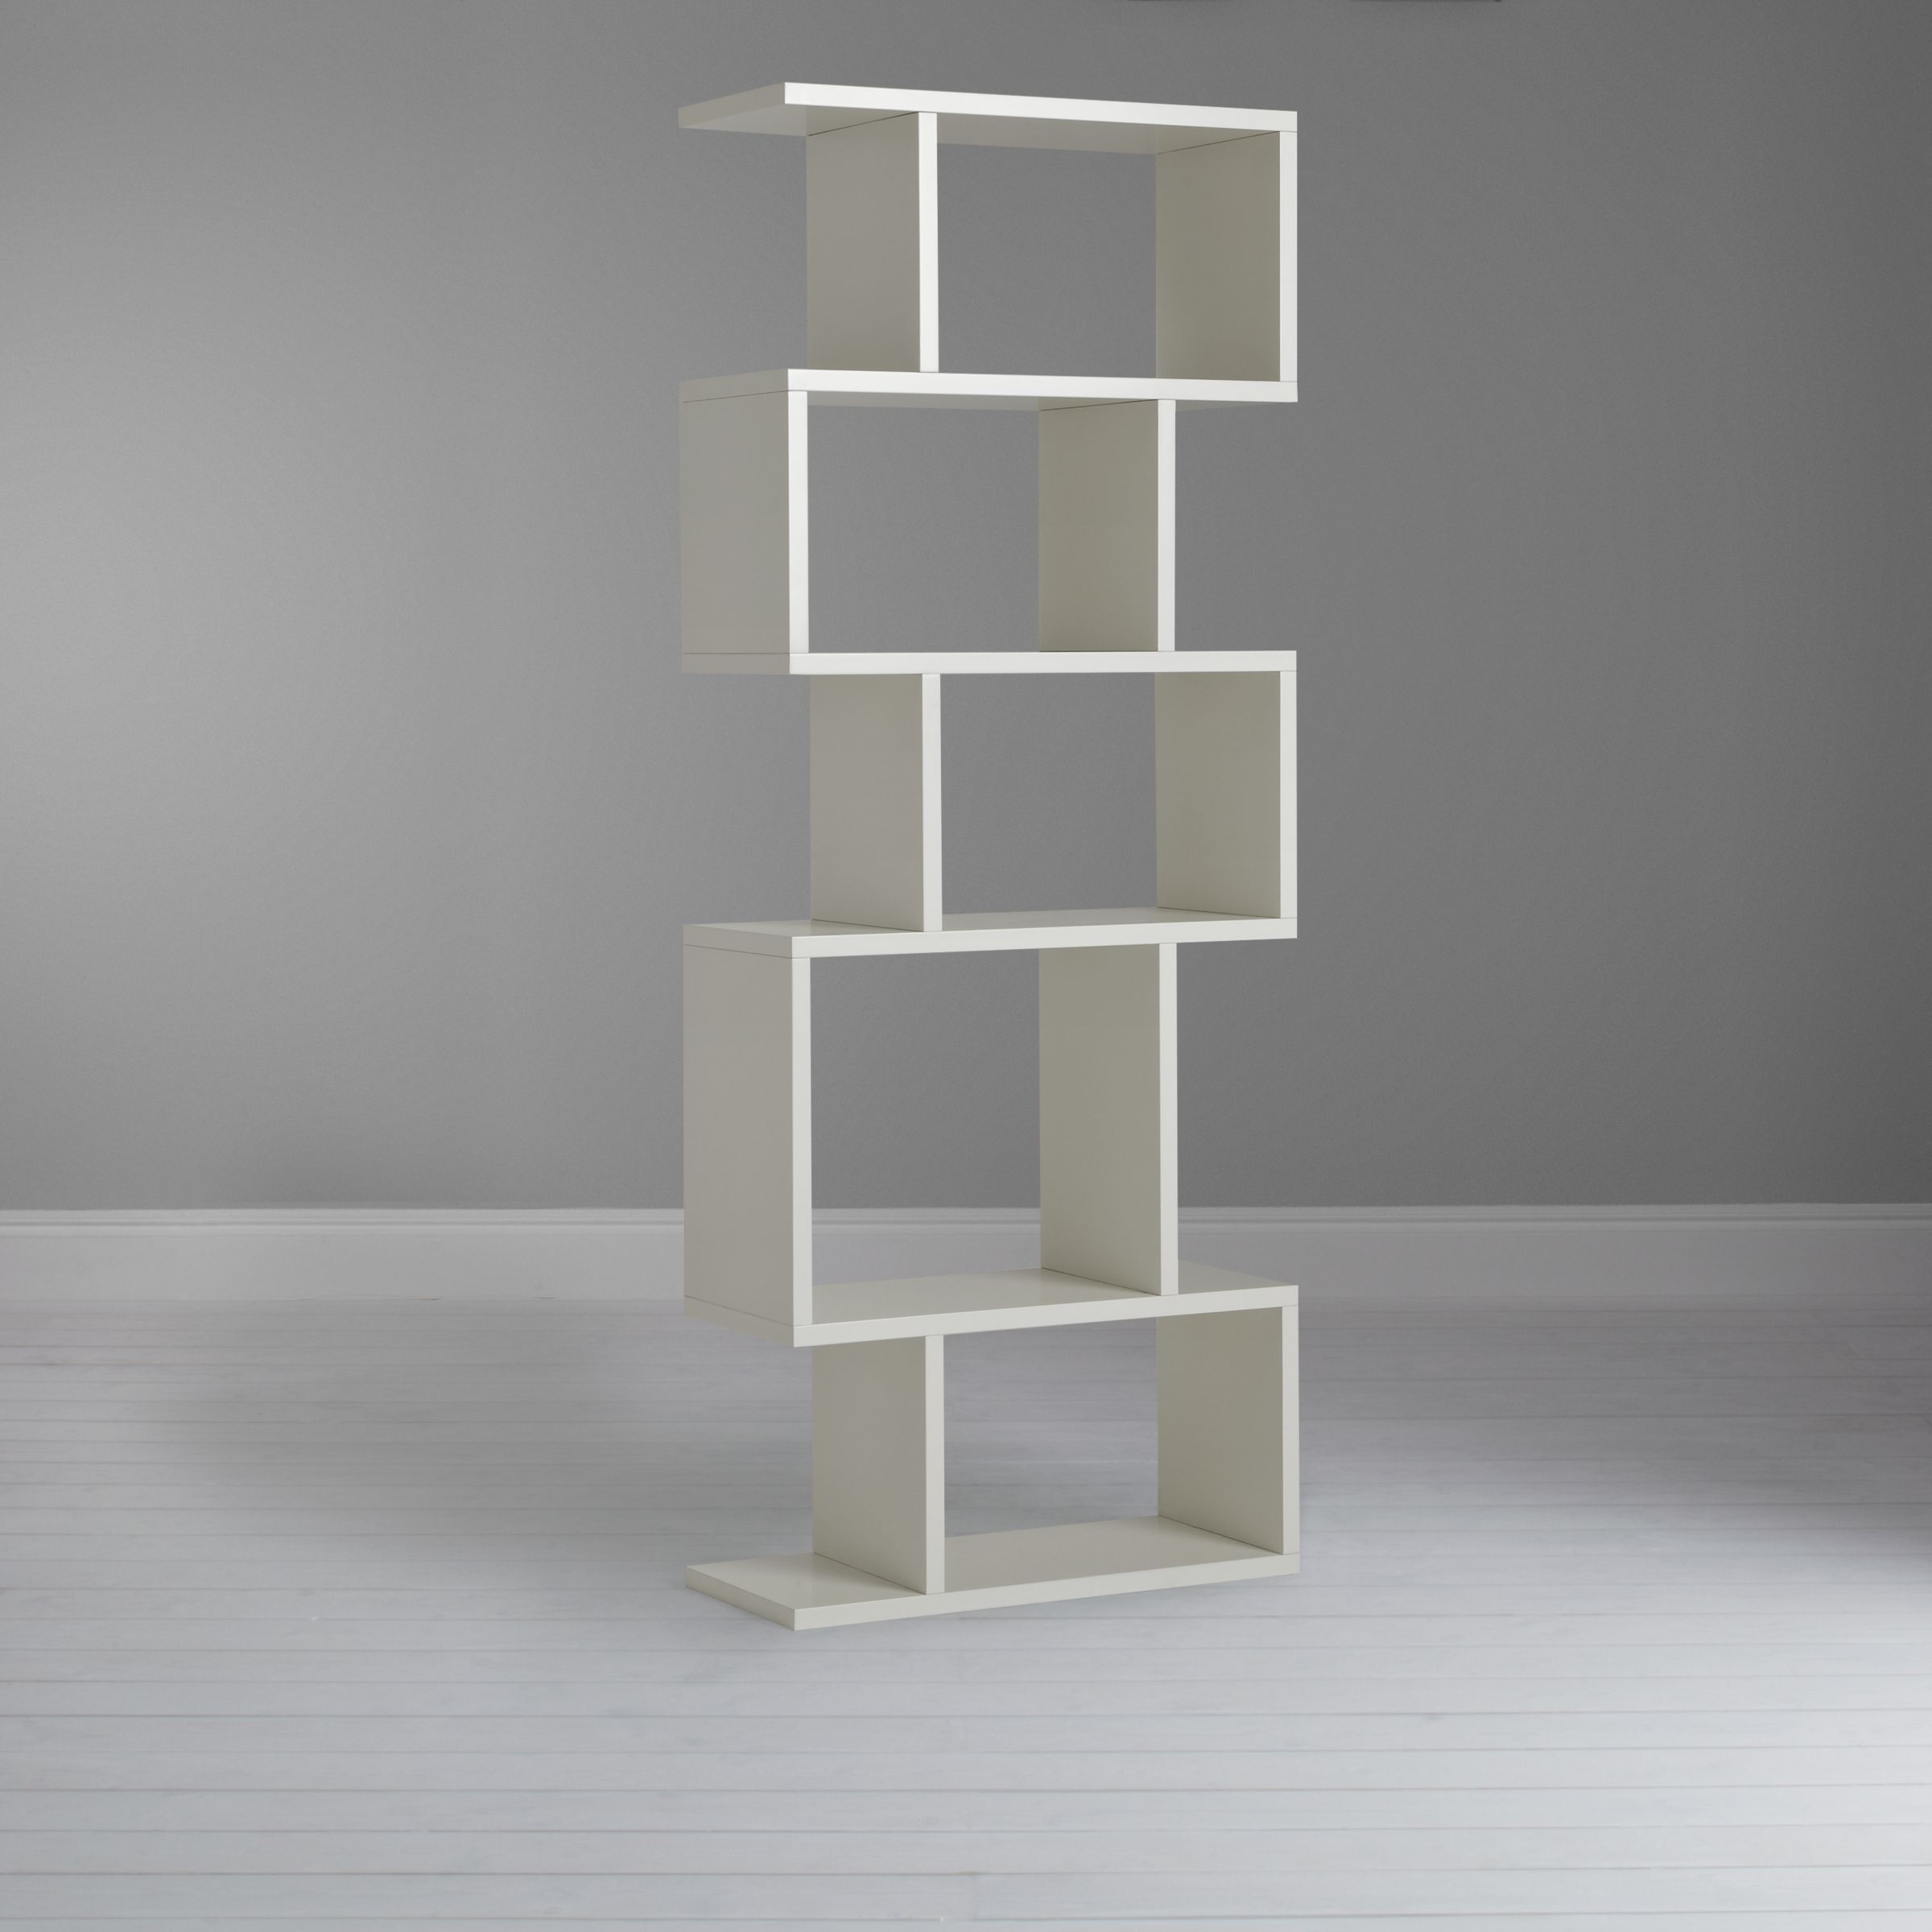 Content by Conran Balance Alcove Shelving, White at John Lewis